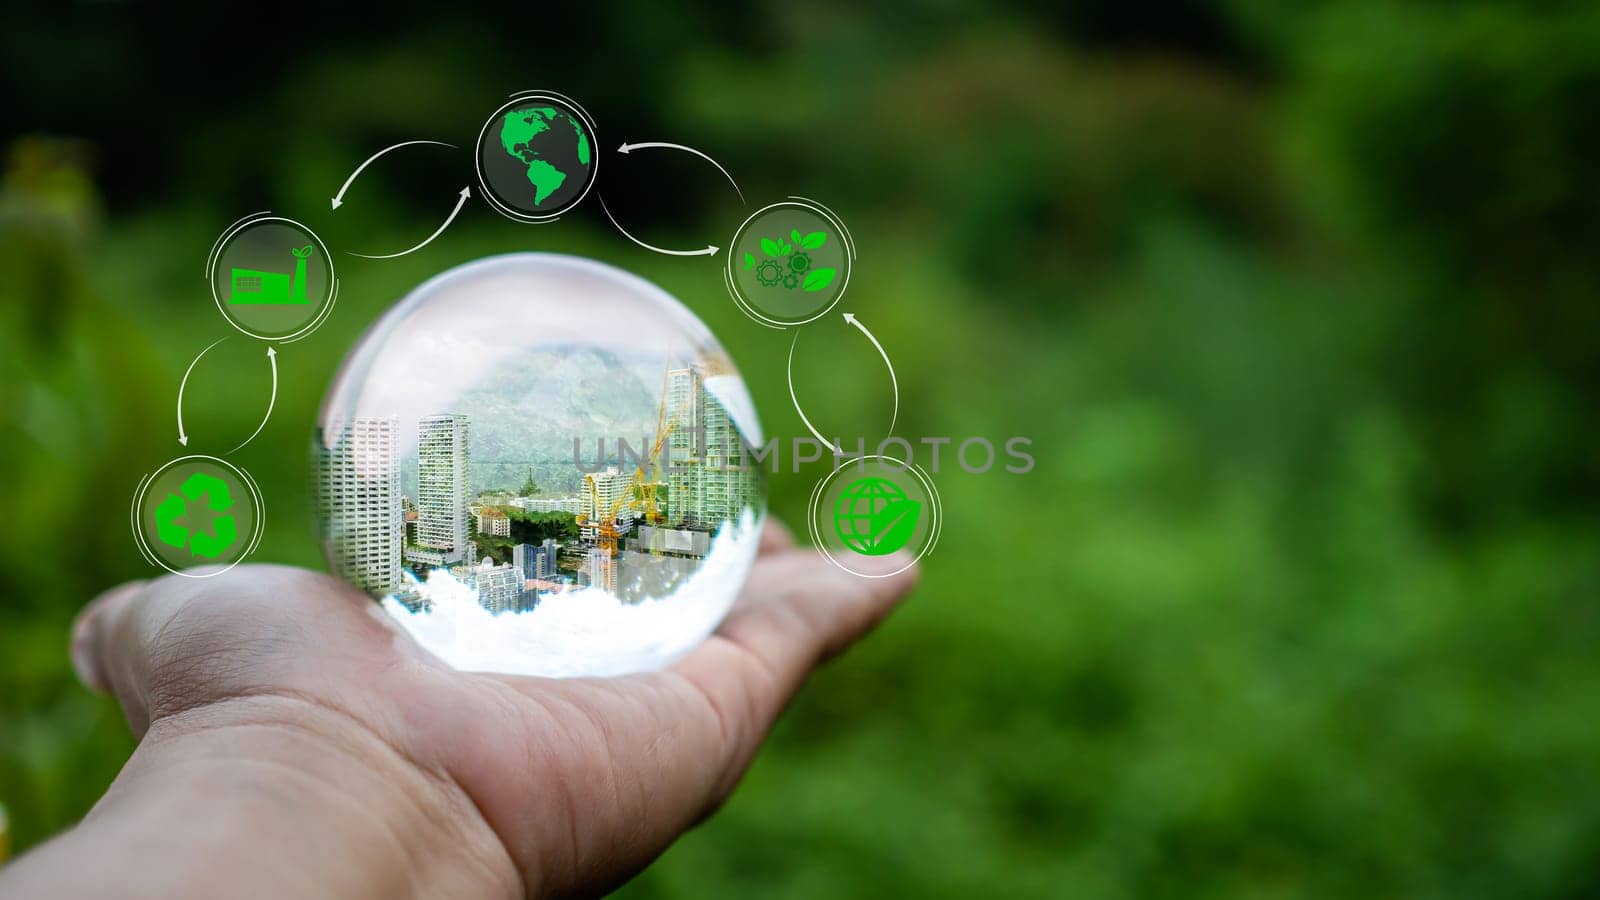 Concept of renewable energy, environmental protection, and sustainable renewable energy sources. An image of a building under construction in crystal glass resting on a person's hand and with a natural green background. Clean energy.